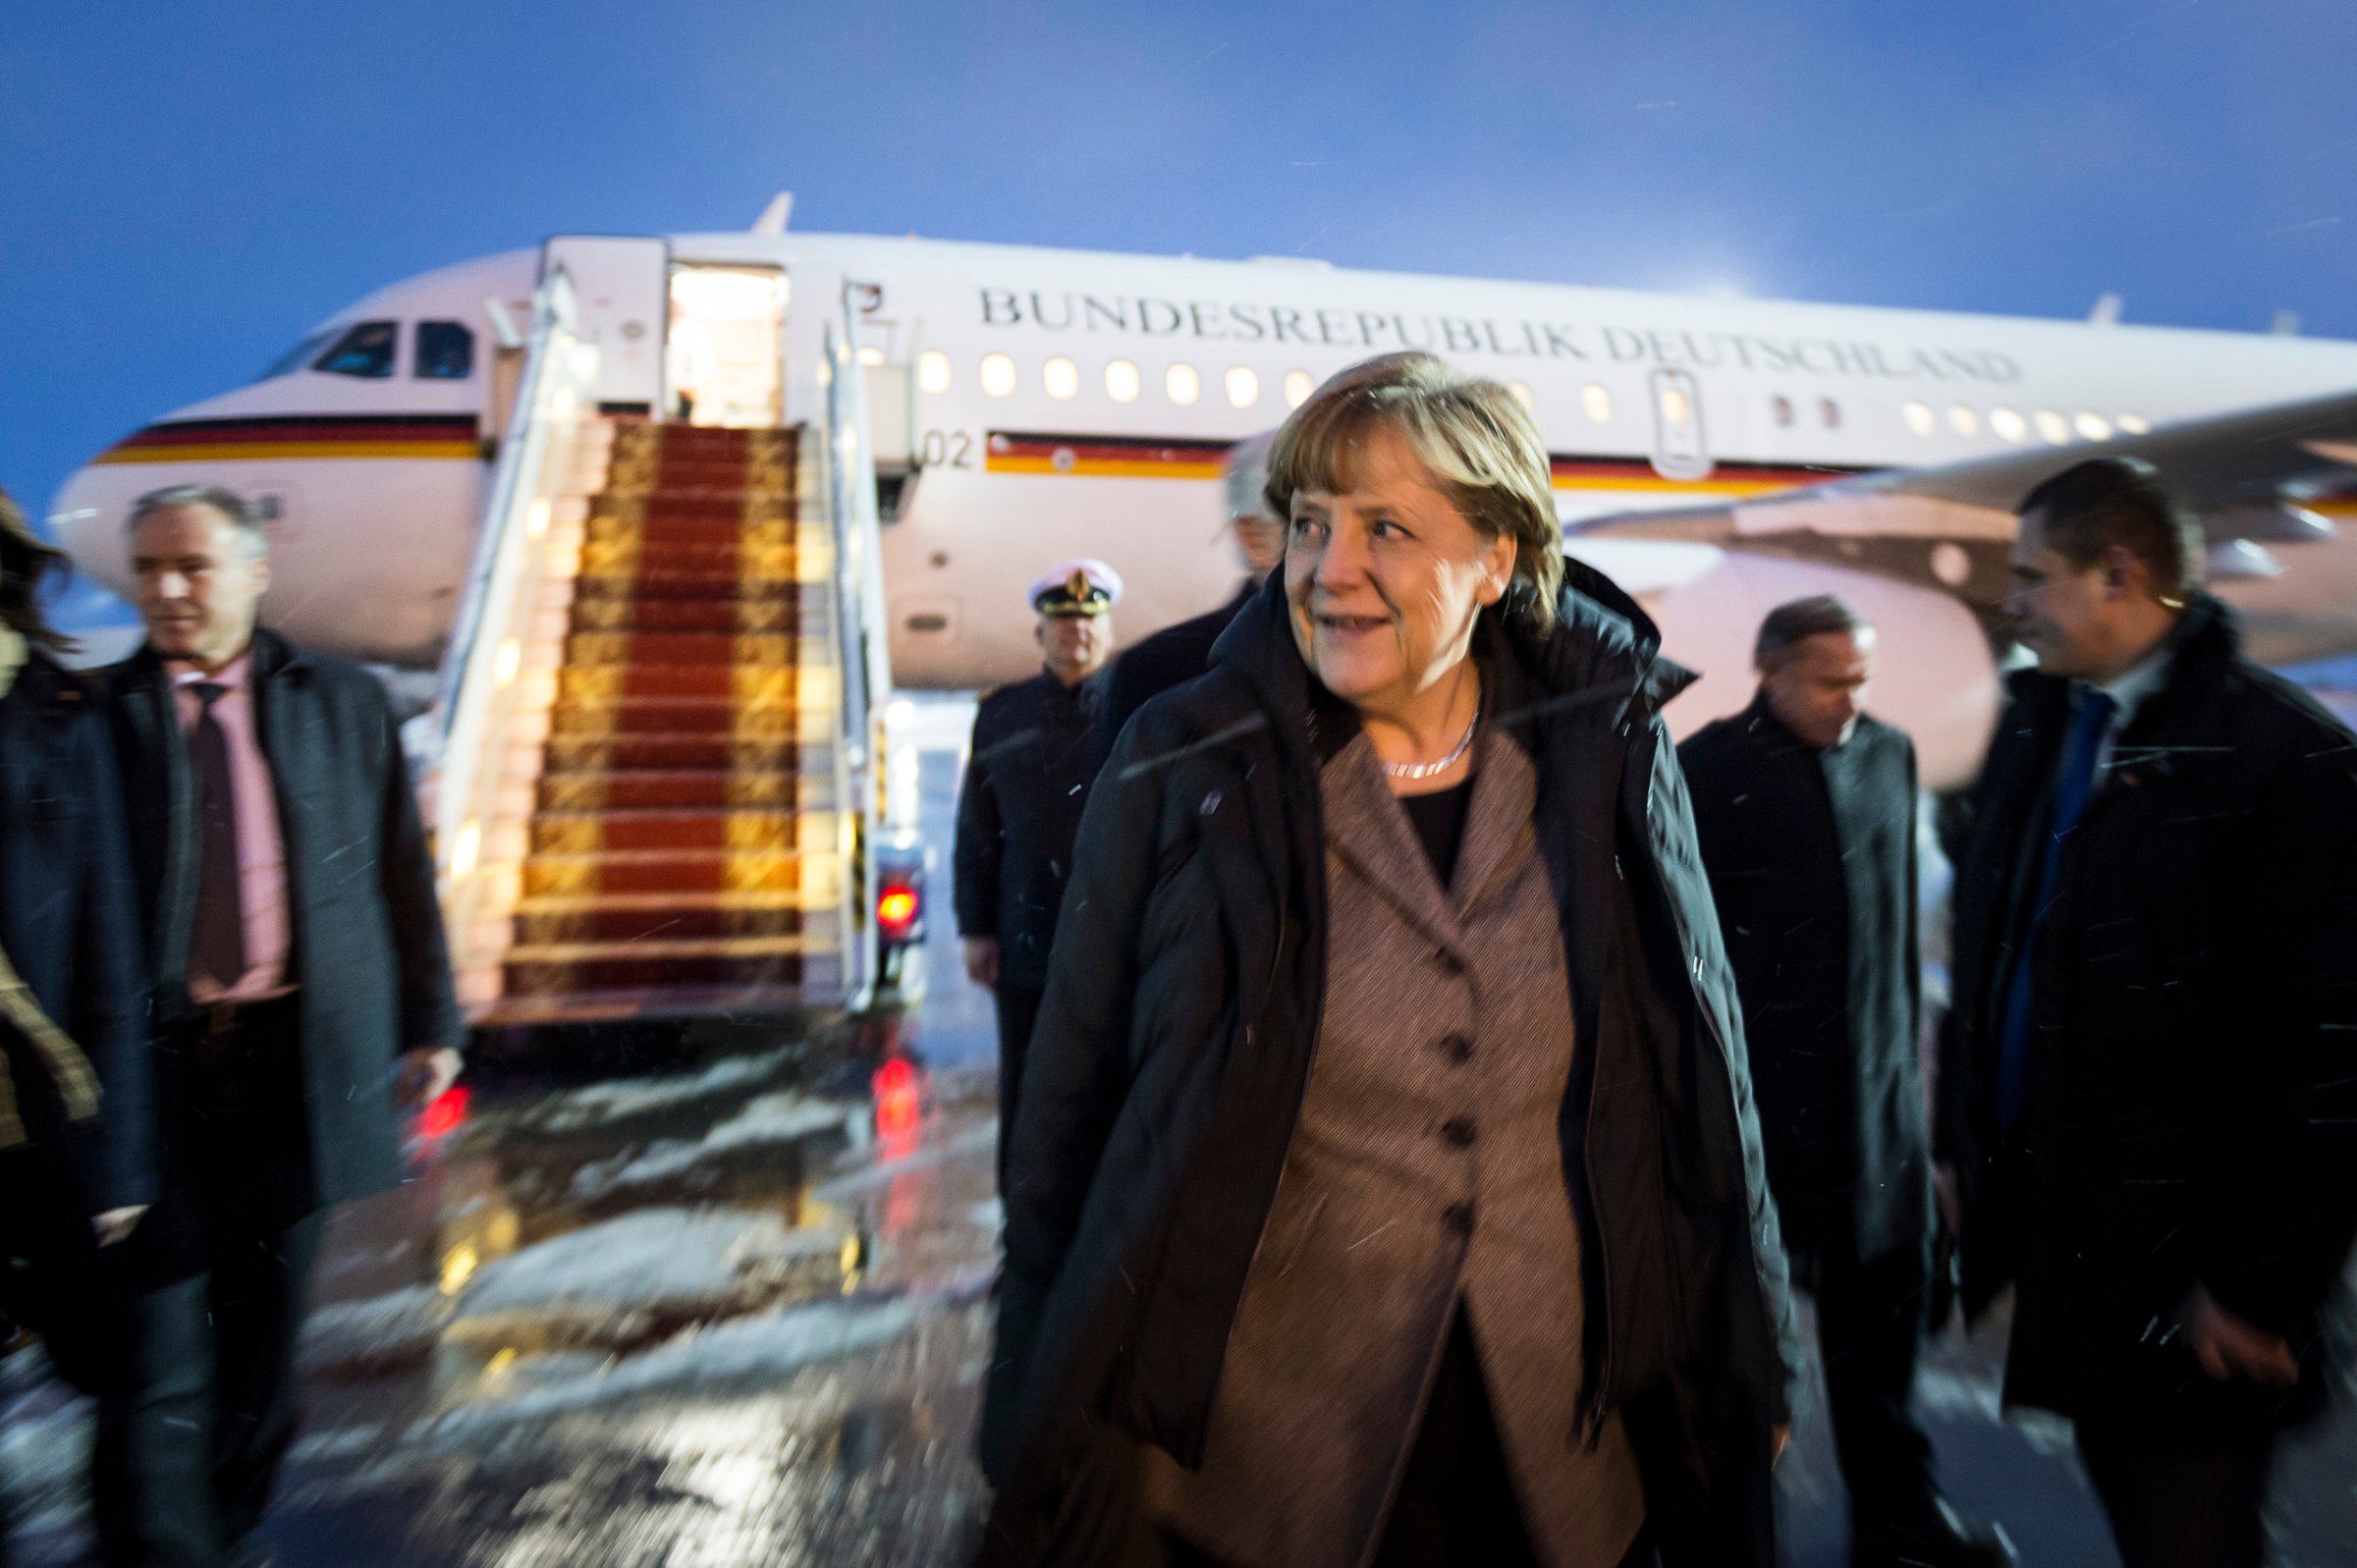 Chancellor Angela Merkel leaves the plane at the airport of Kiev, after arriving for another round of negotiations with the presidents of France, Ukraine and Russia to settle the conflict in Ukraine. Feb. 5, 2015.ellor Angela Merkel leaves the plane at the airport of Kiev, after arriving for another round of negotiations with the presidents of France, Ukraine and Russia to settle the conflict in Ukraine. Feb. 5, 2015. MerkelRR